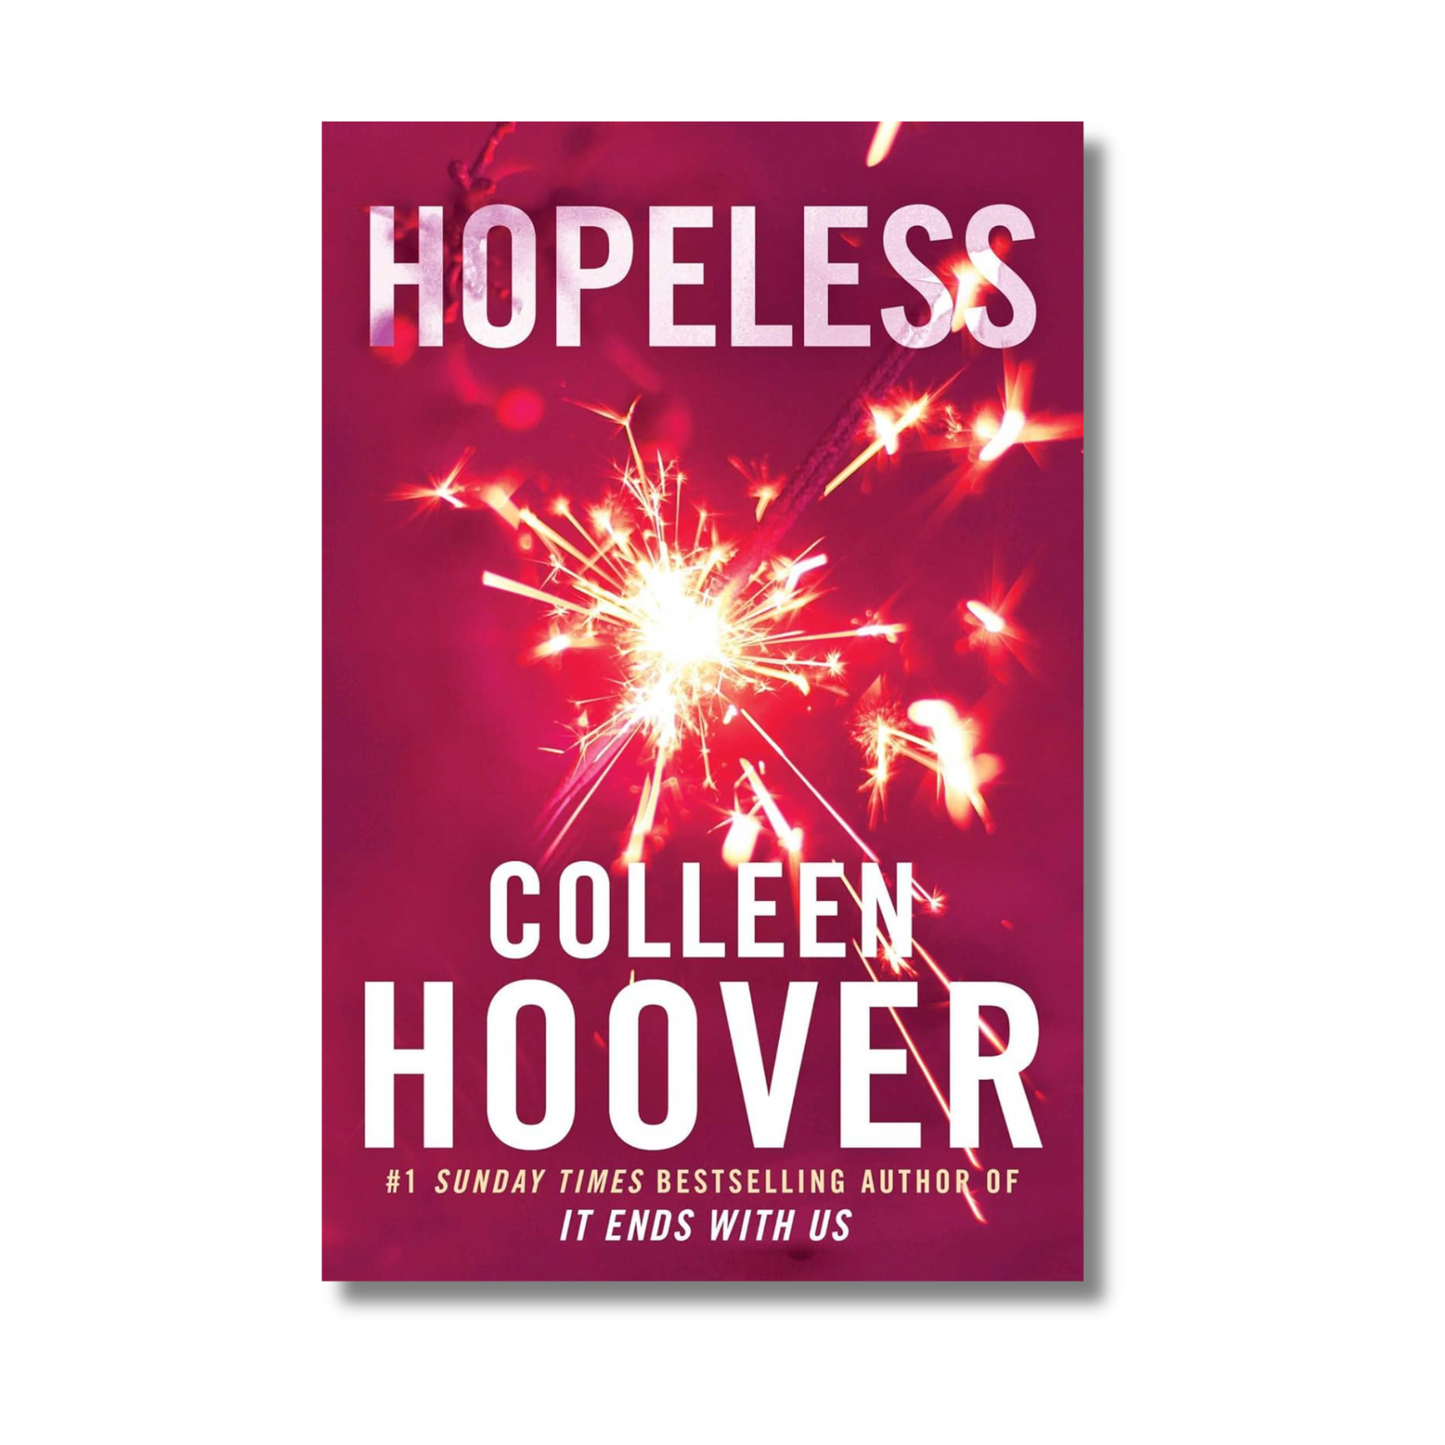 Hopeless by Colleen Hoover (Paperback)